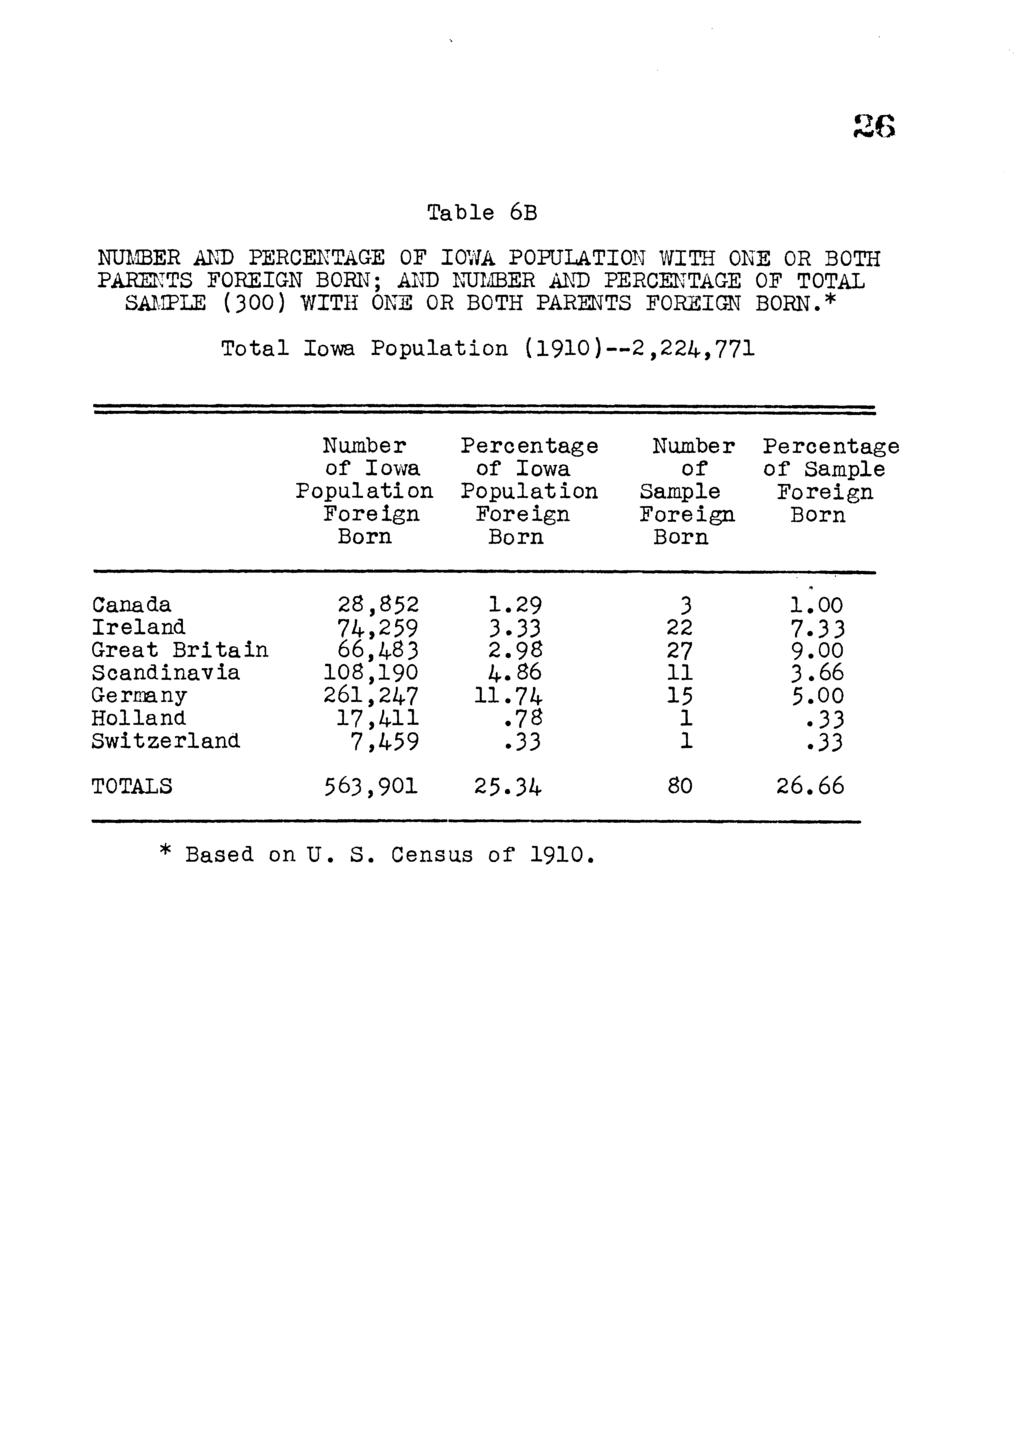 2 6 T ab le 6B NUMBER AND PERCENTAGE OE IOWA POPULATION WITH ONE OR BOTH PARENTS FOREIGN BORN; AND NUMBER AND PERCENTAGE OF TOTAL SAMPLE (3 0 0) WITH ONE OR BOTH PARENTS FOREIGN BORN.